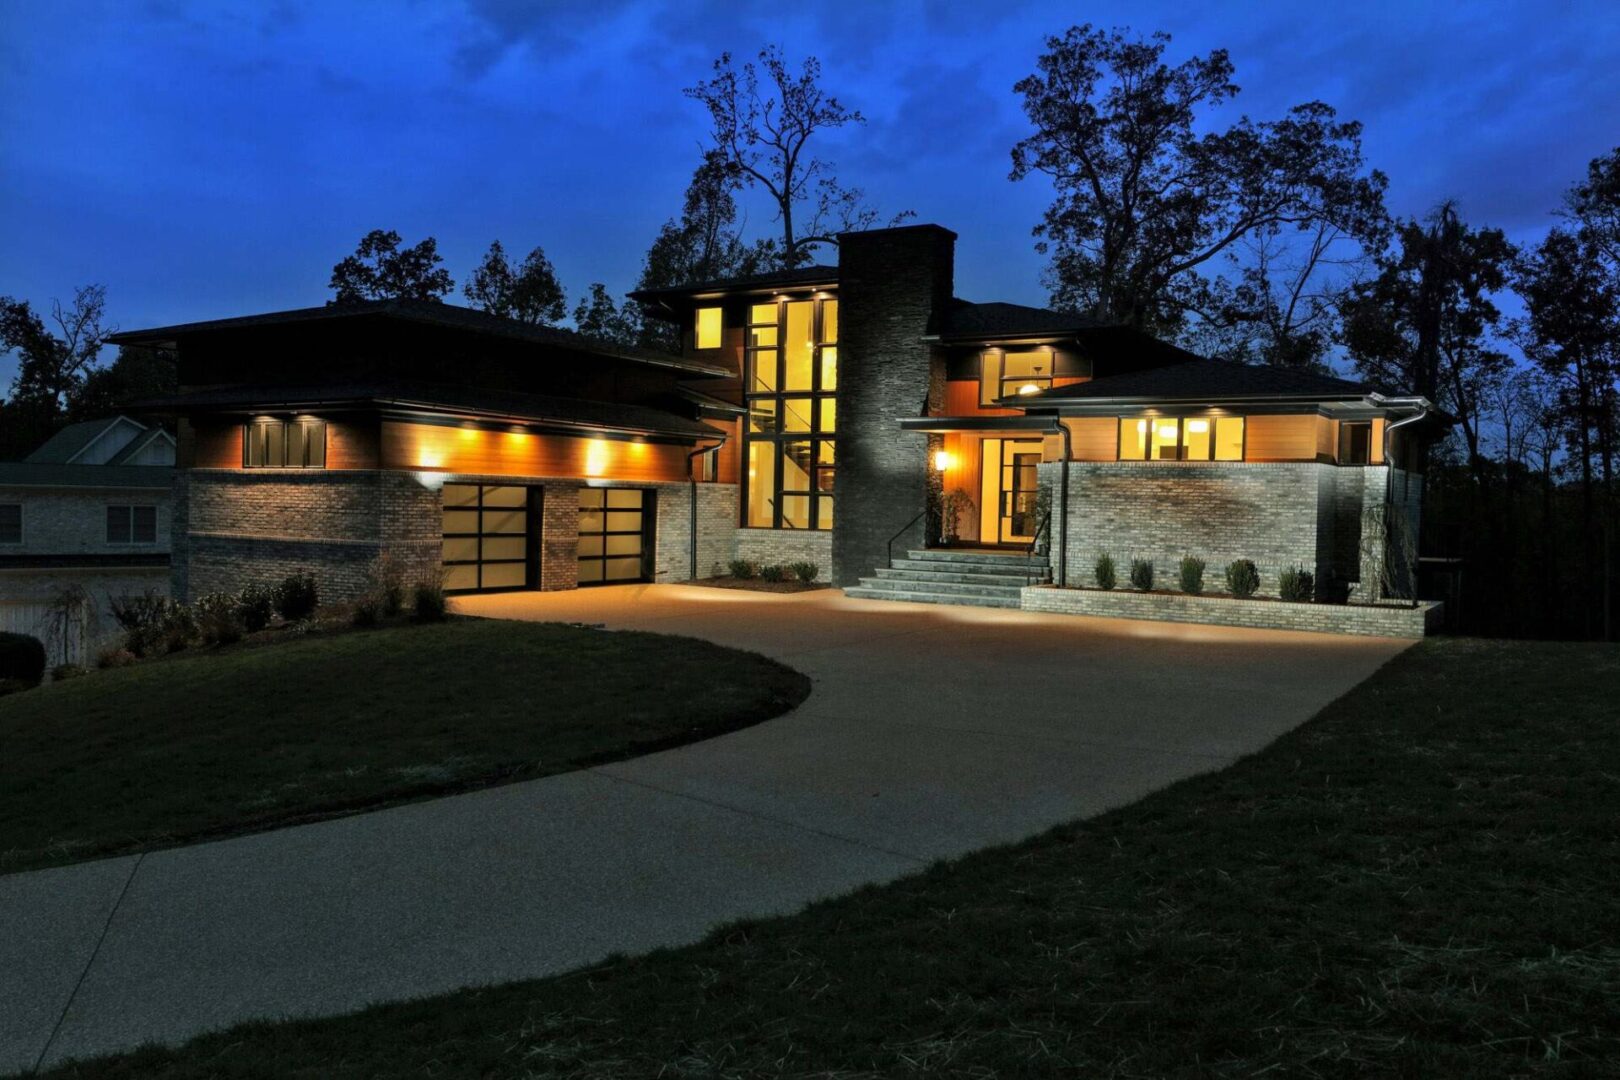 A large modern style home with a driveway at night.